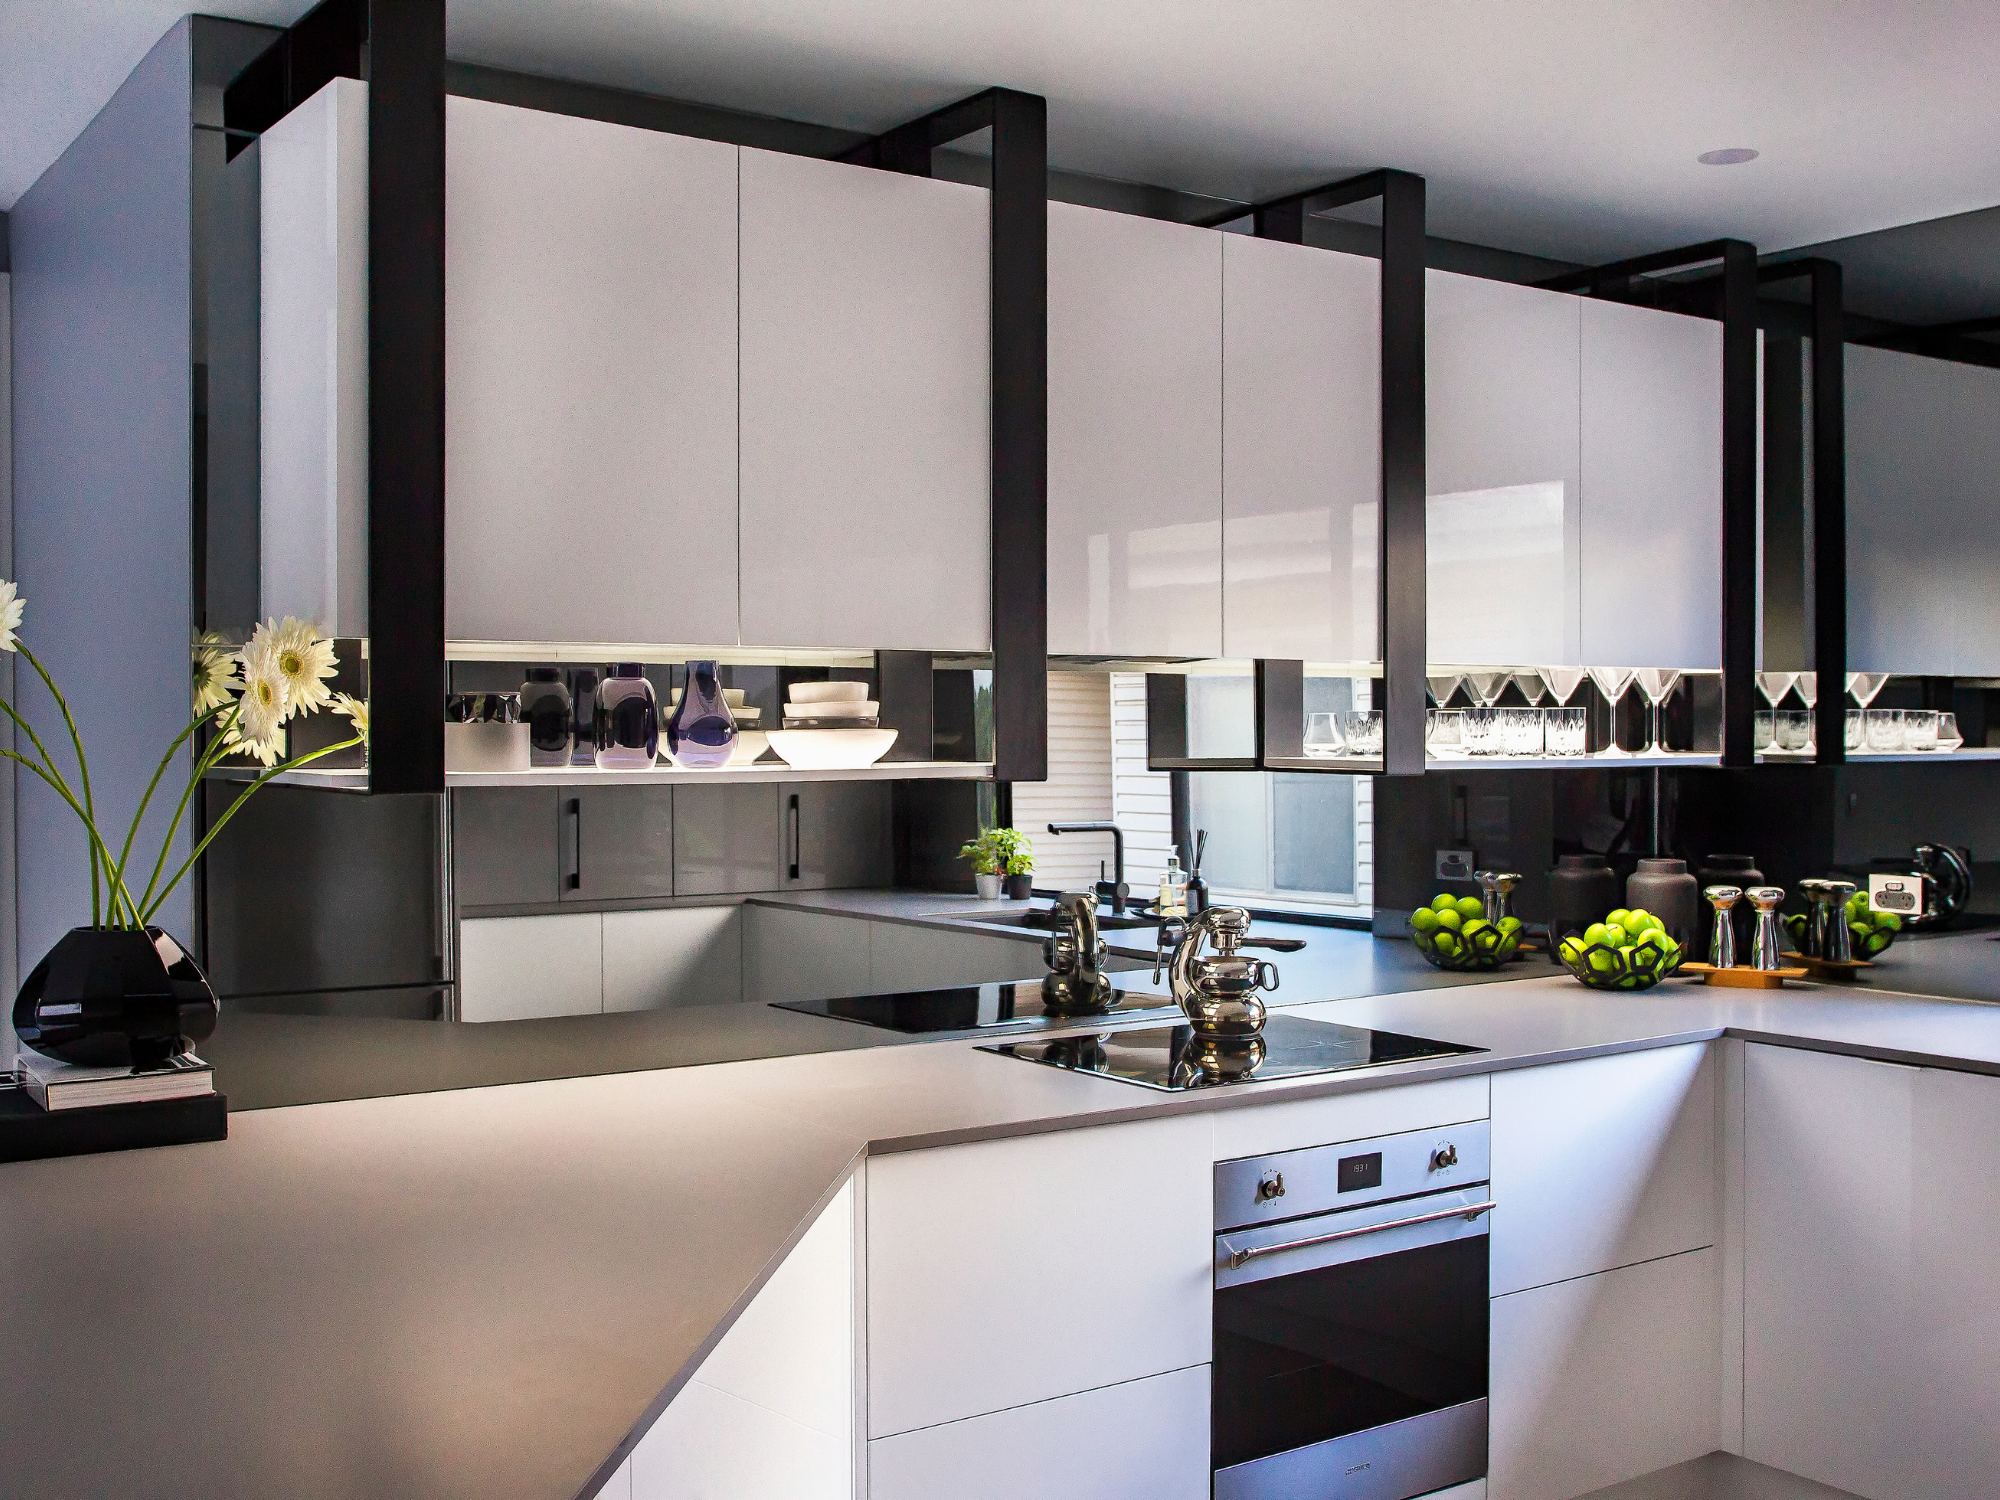 Award Winning Kitchens Concepts By